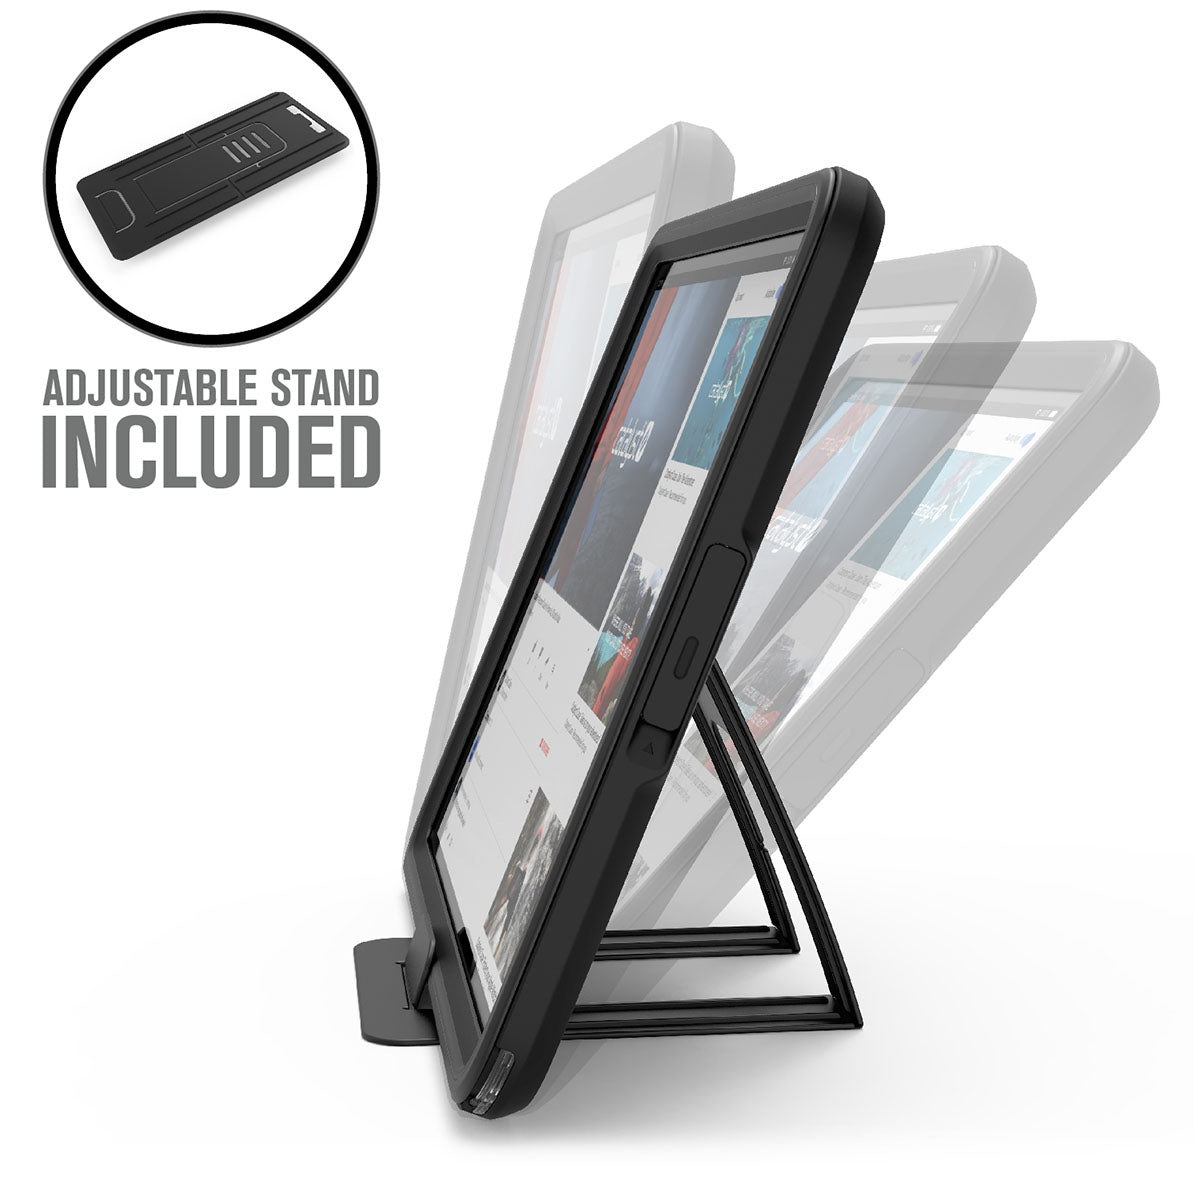 catalyst ipad air gen 3 10.5 waterproof case stealth black side view with adjustable stand text reads adjustable stand included